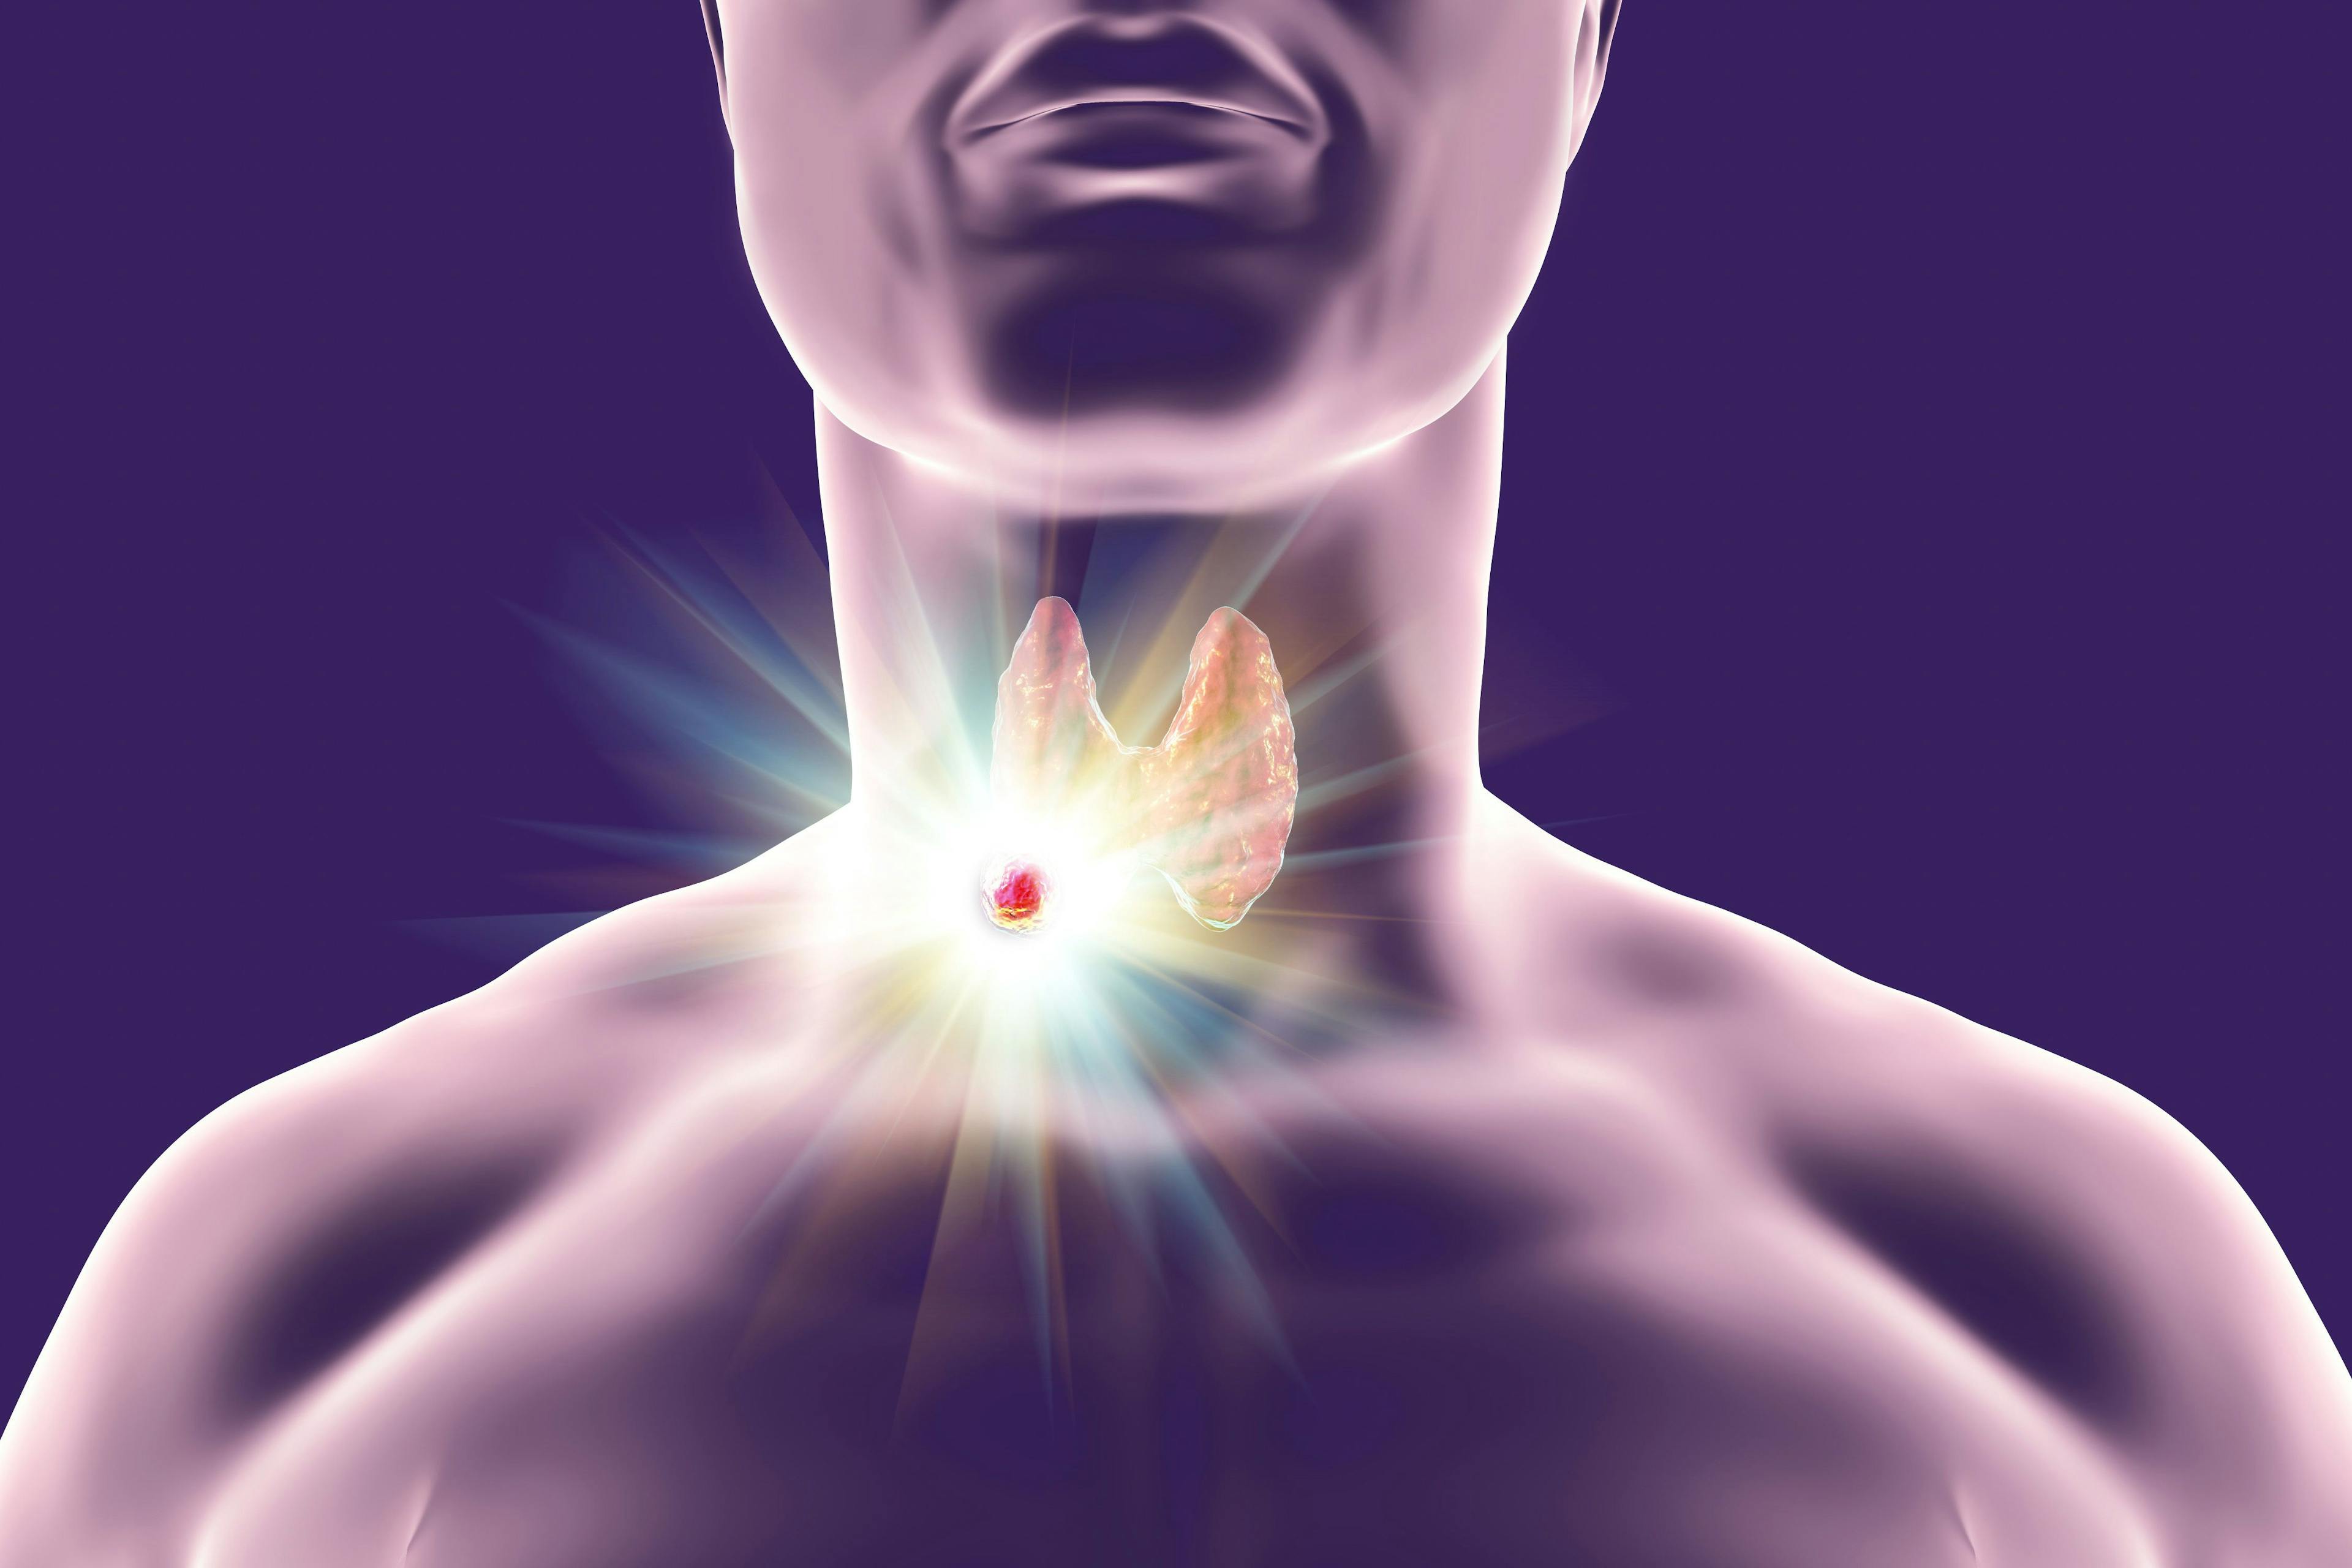 Treatment advancements over the past two decades have paved the way for patients with thyroid cancer to live longer and better lives, according to an expert from Cleveland Clinic's Taussig Cancer Institute.